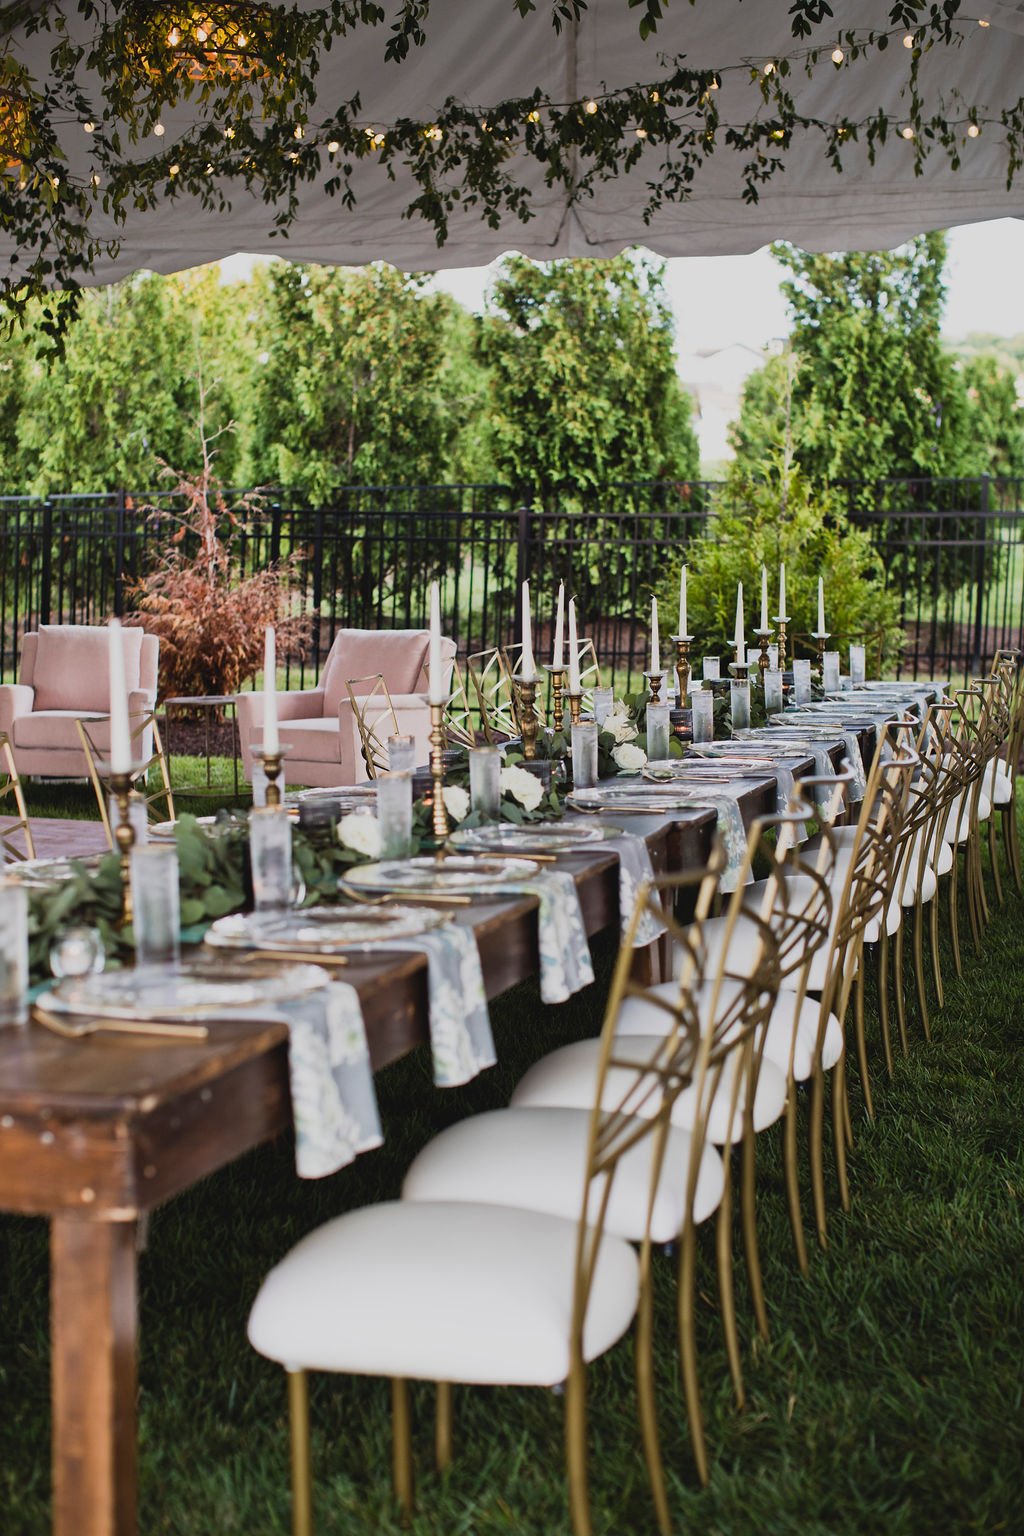 This backyard reception had a lush head table filled with garlands of eucalyptus, garden roses, ruscus, and spray roses. Designed by Rosemary and Finch in Nashville, TN